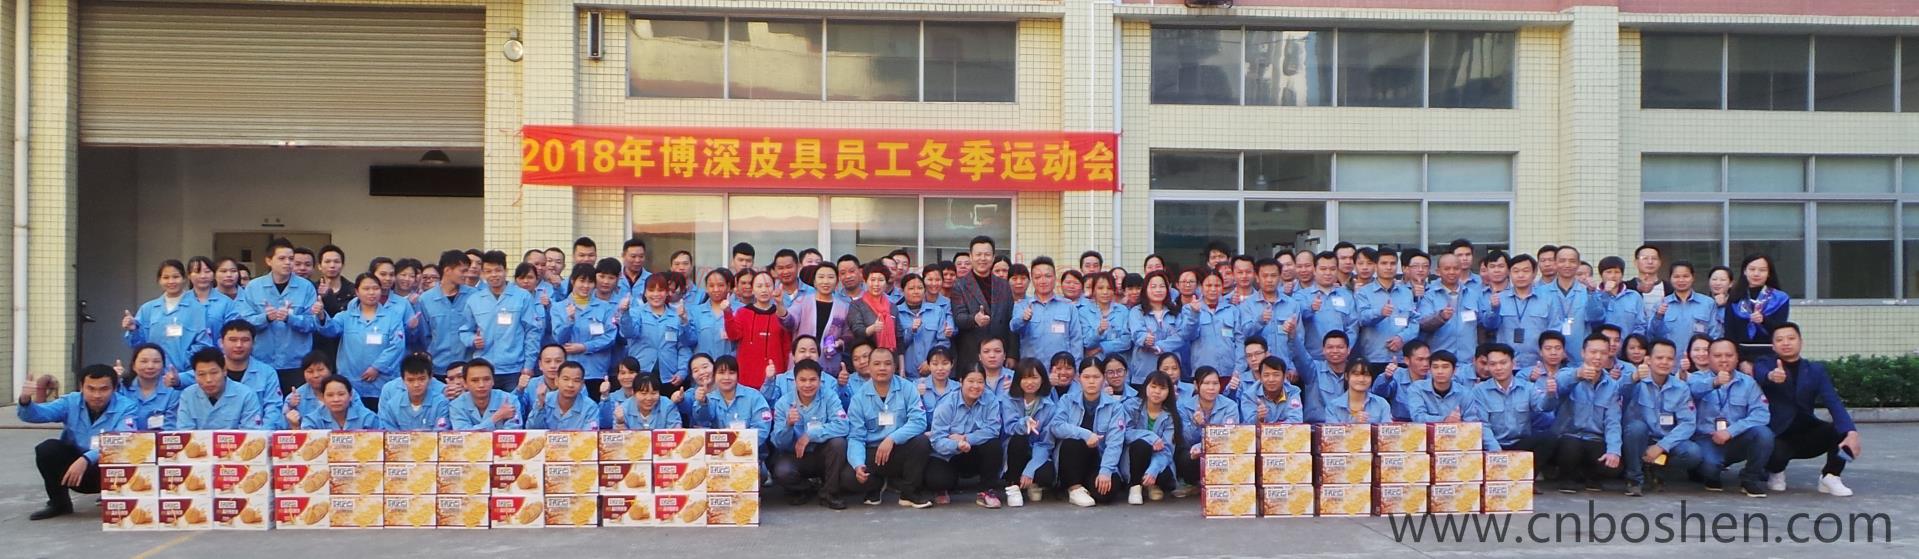 2018 Employee Winter Games of Guangzhou Boshen Leather Goods Manufacturer Was Unusually Brilliant -- with High Lights